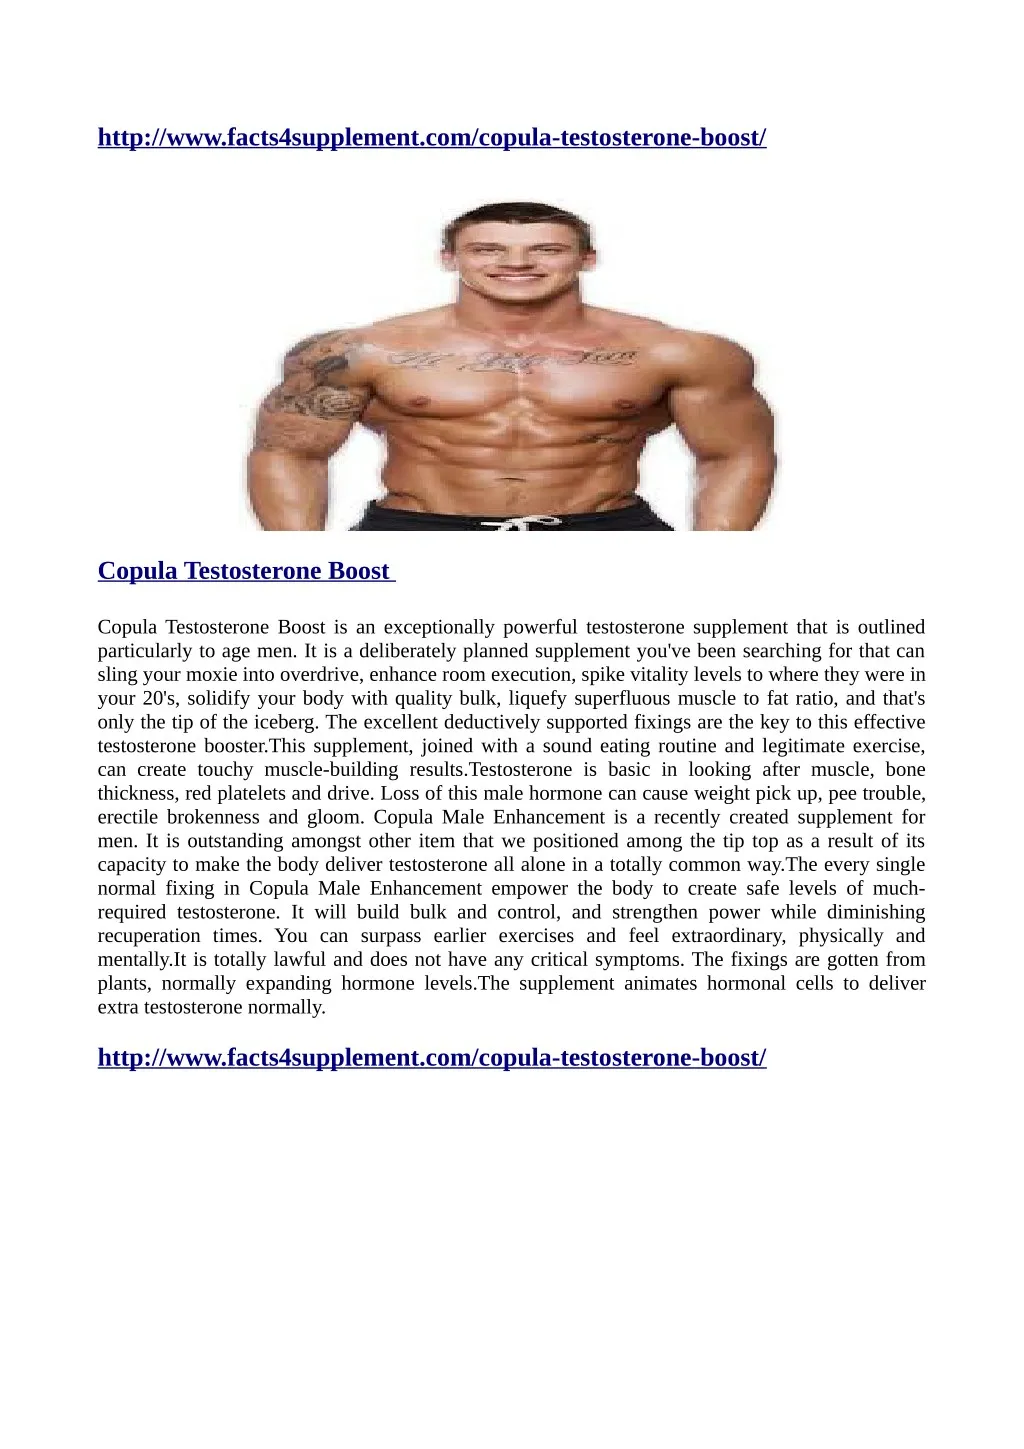 http www facts4supplement com copula testosterone